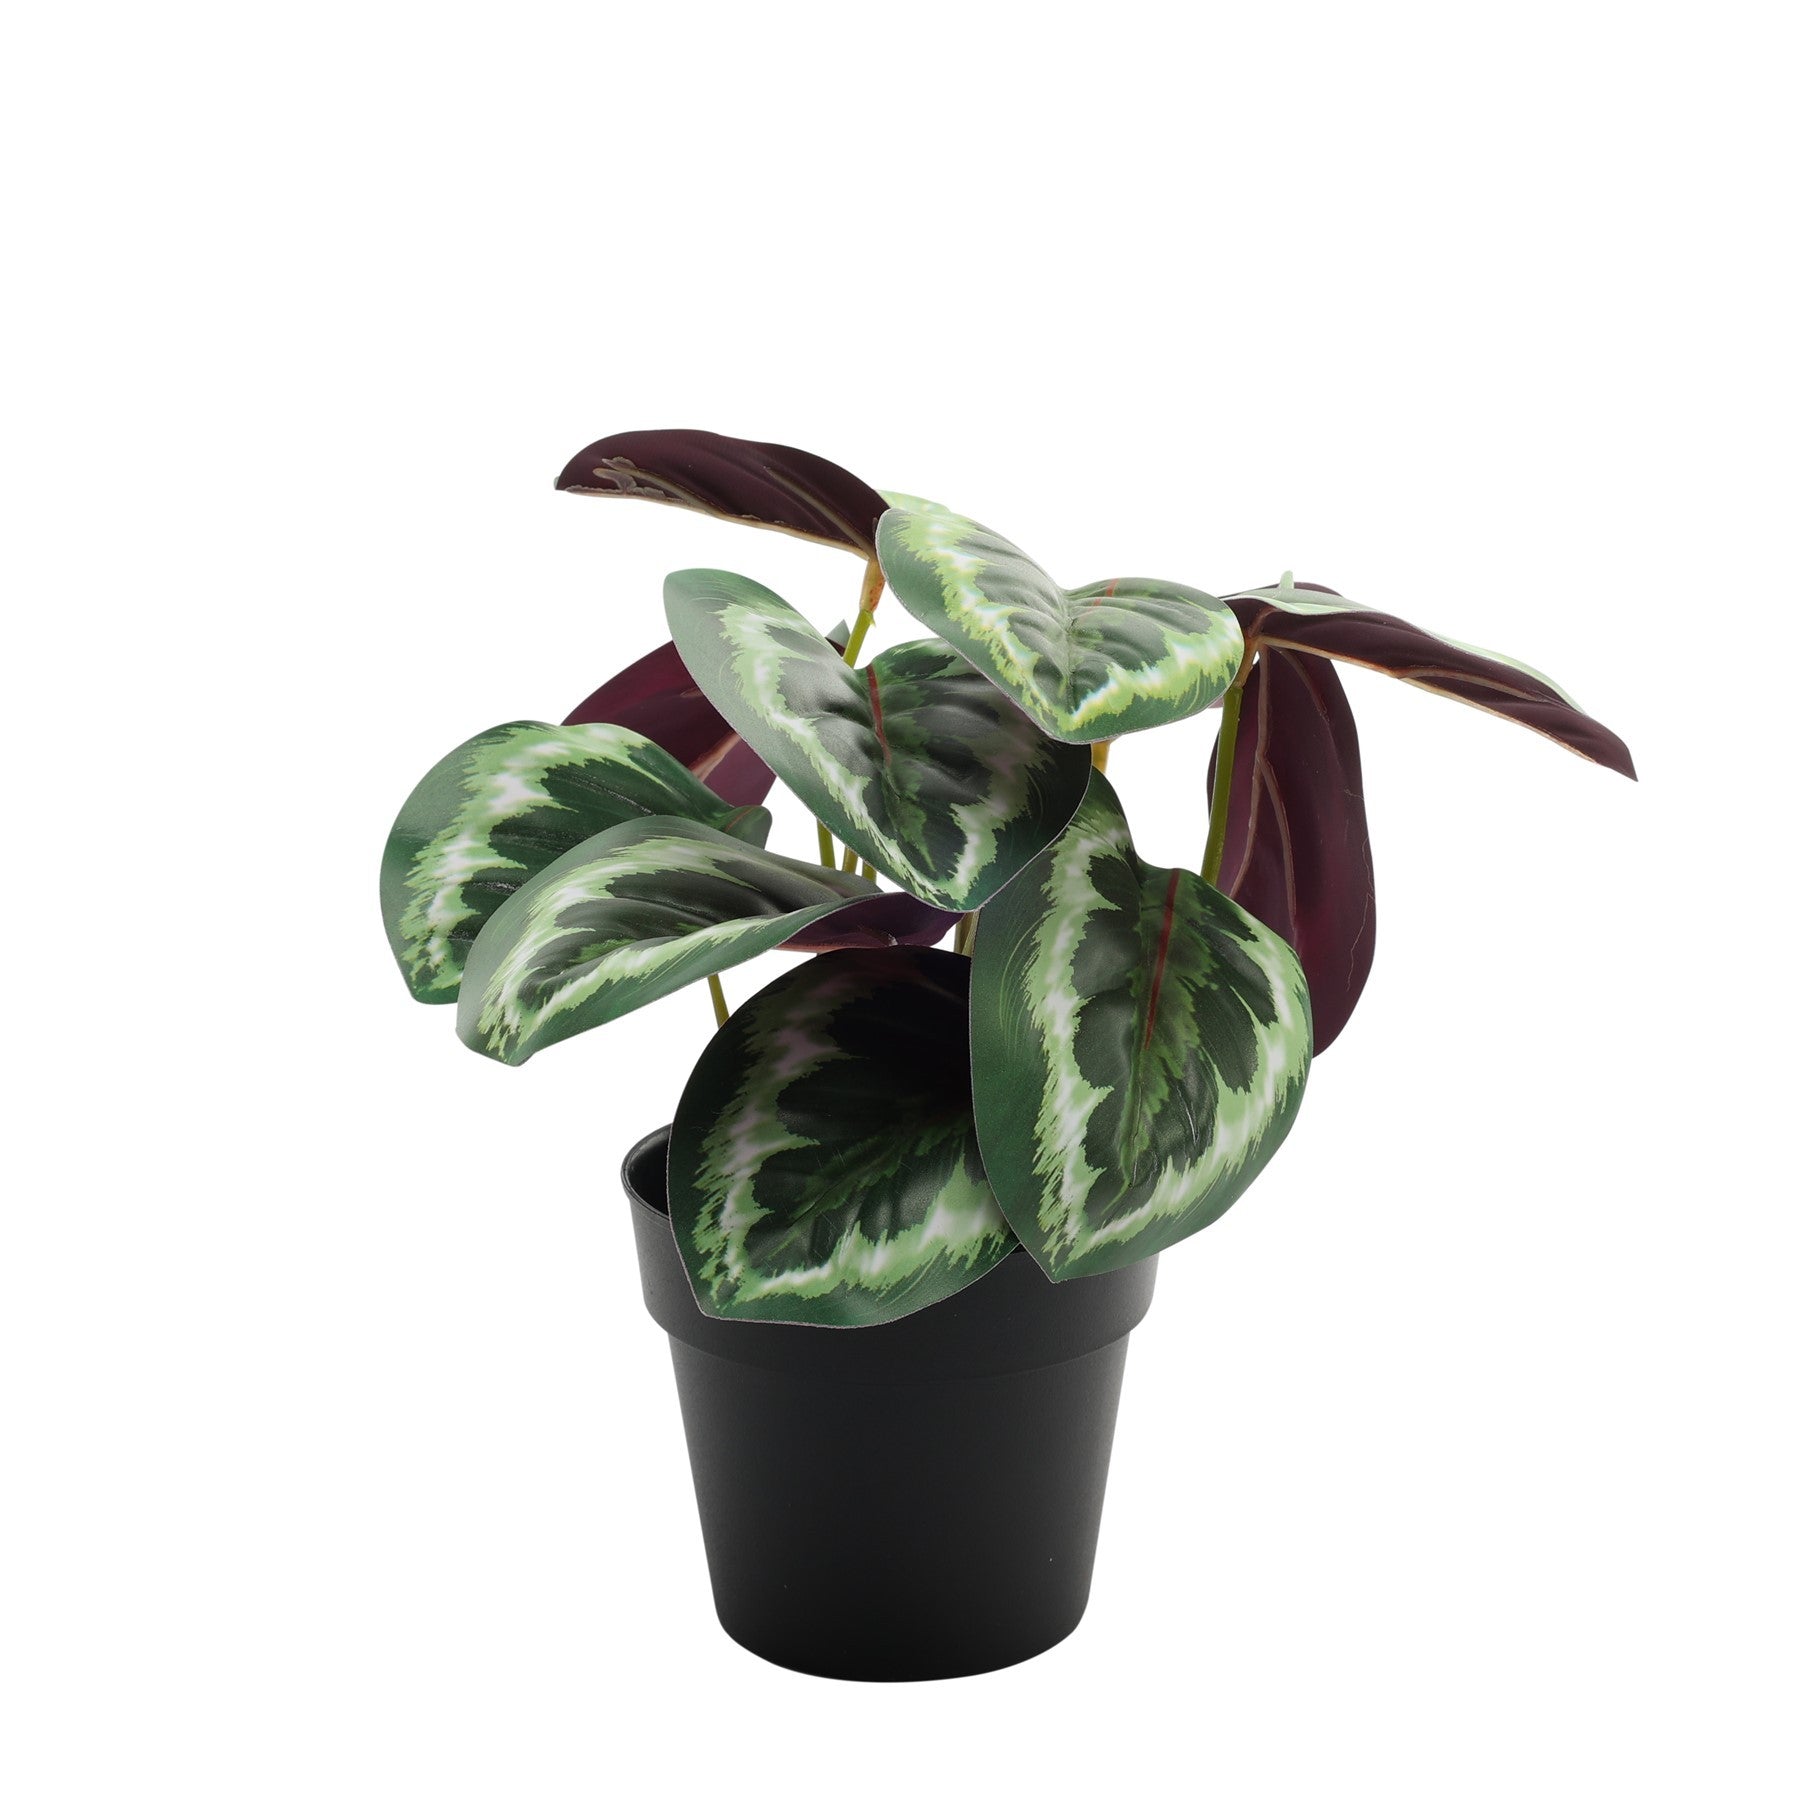 View Calathea Potted House Plant 22cm information